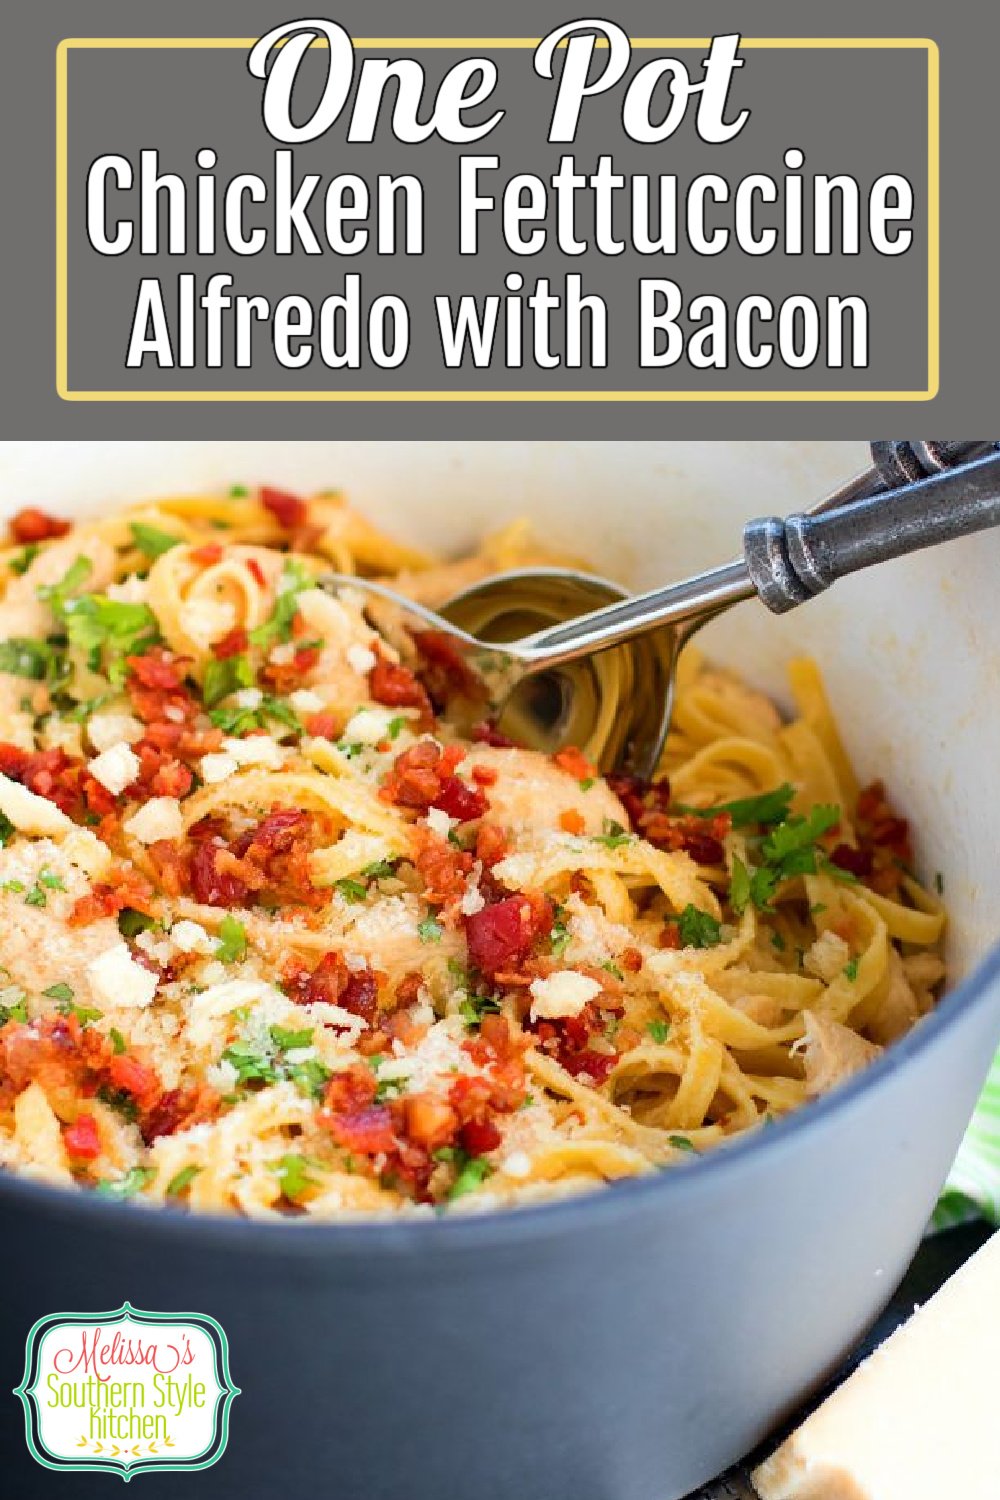 Save money and time and make this One Pot Chicken Fettuccine Alfredo with Bacon at home #fettuccinealfredo #Italianrecipes #alfredosauce #dinner #chickenrecipes #onepotmeals #chicken #pastarecipes #easydinnerideas #dinnerideas #bacon #southernrecipes #southernfood via @melissasssk